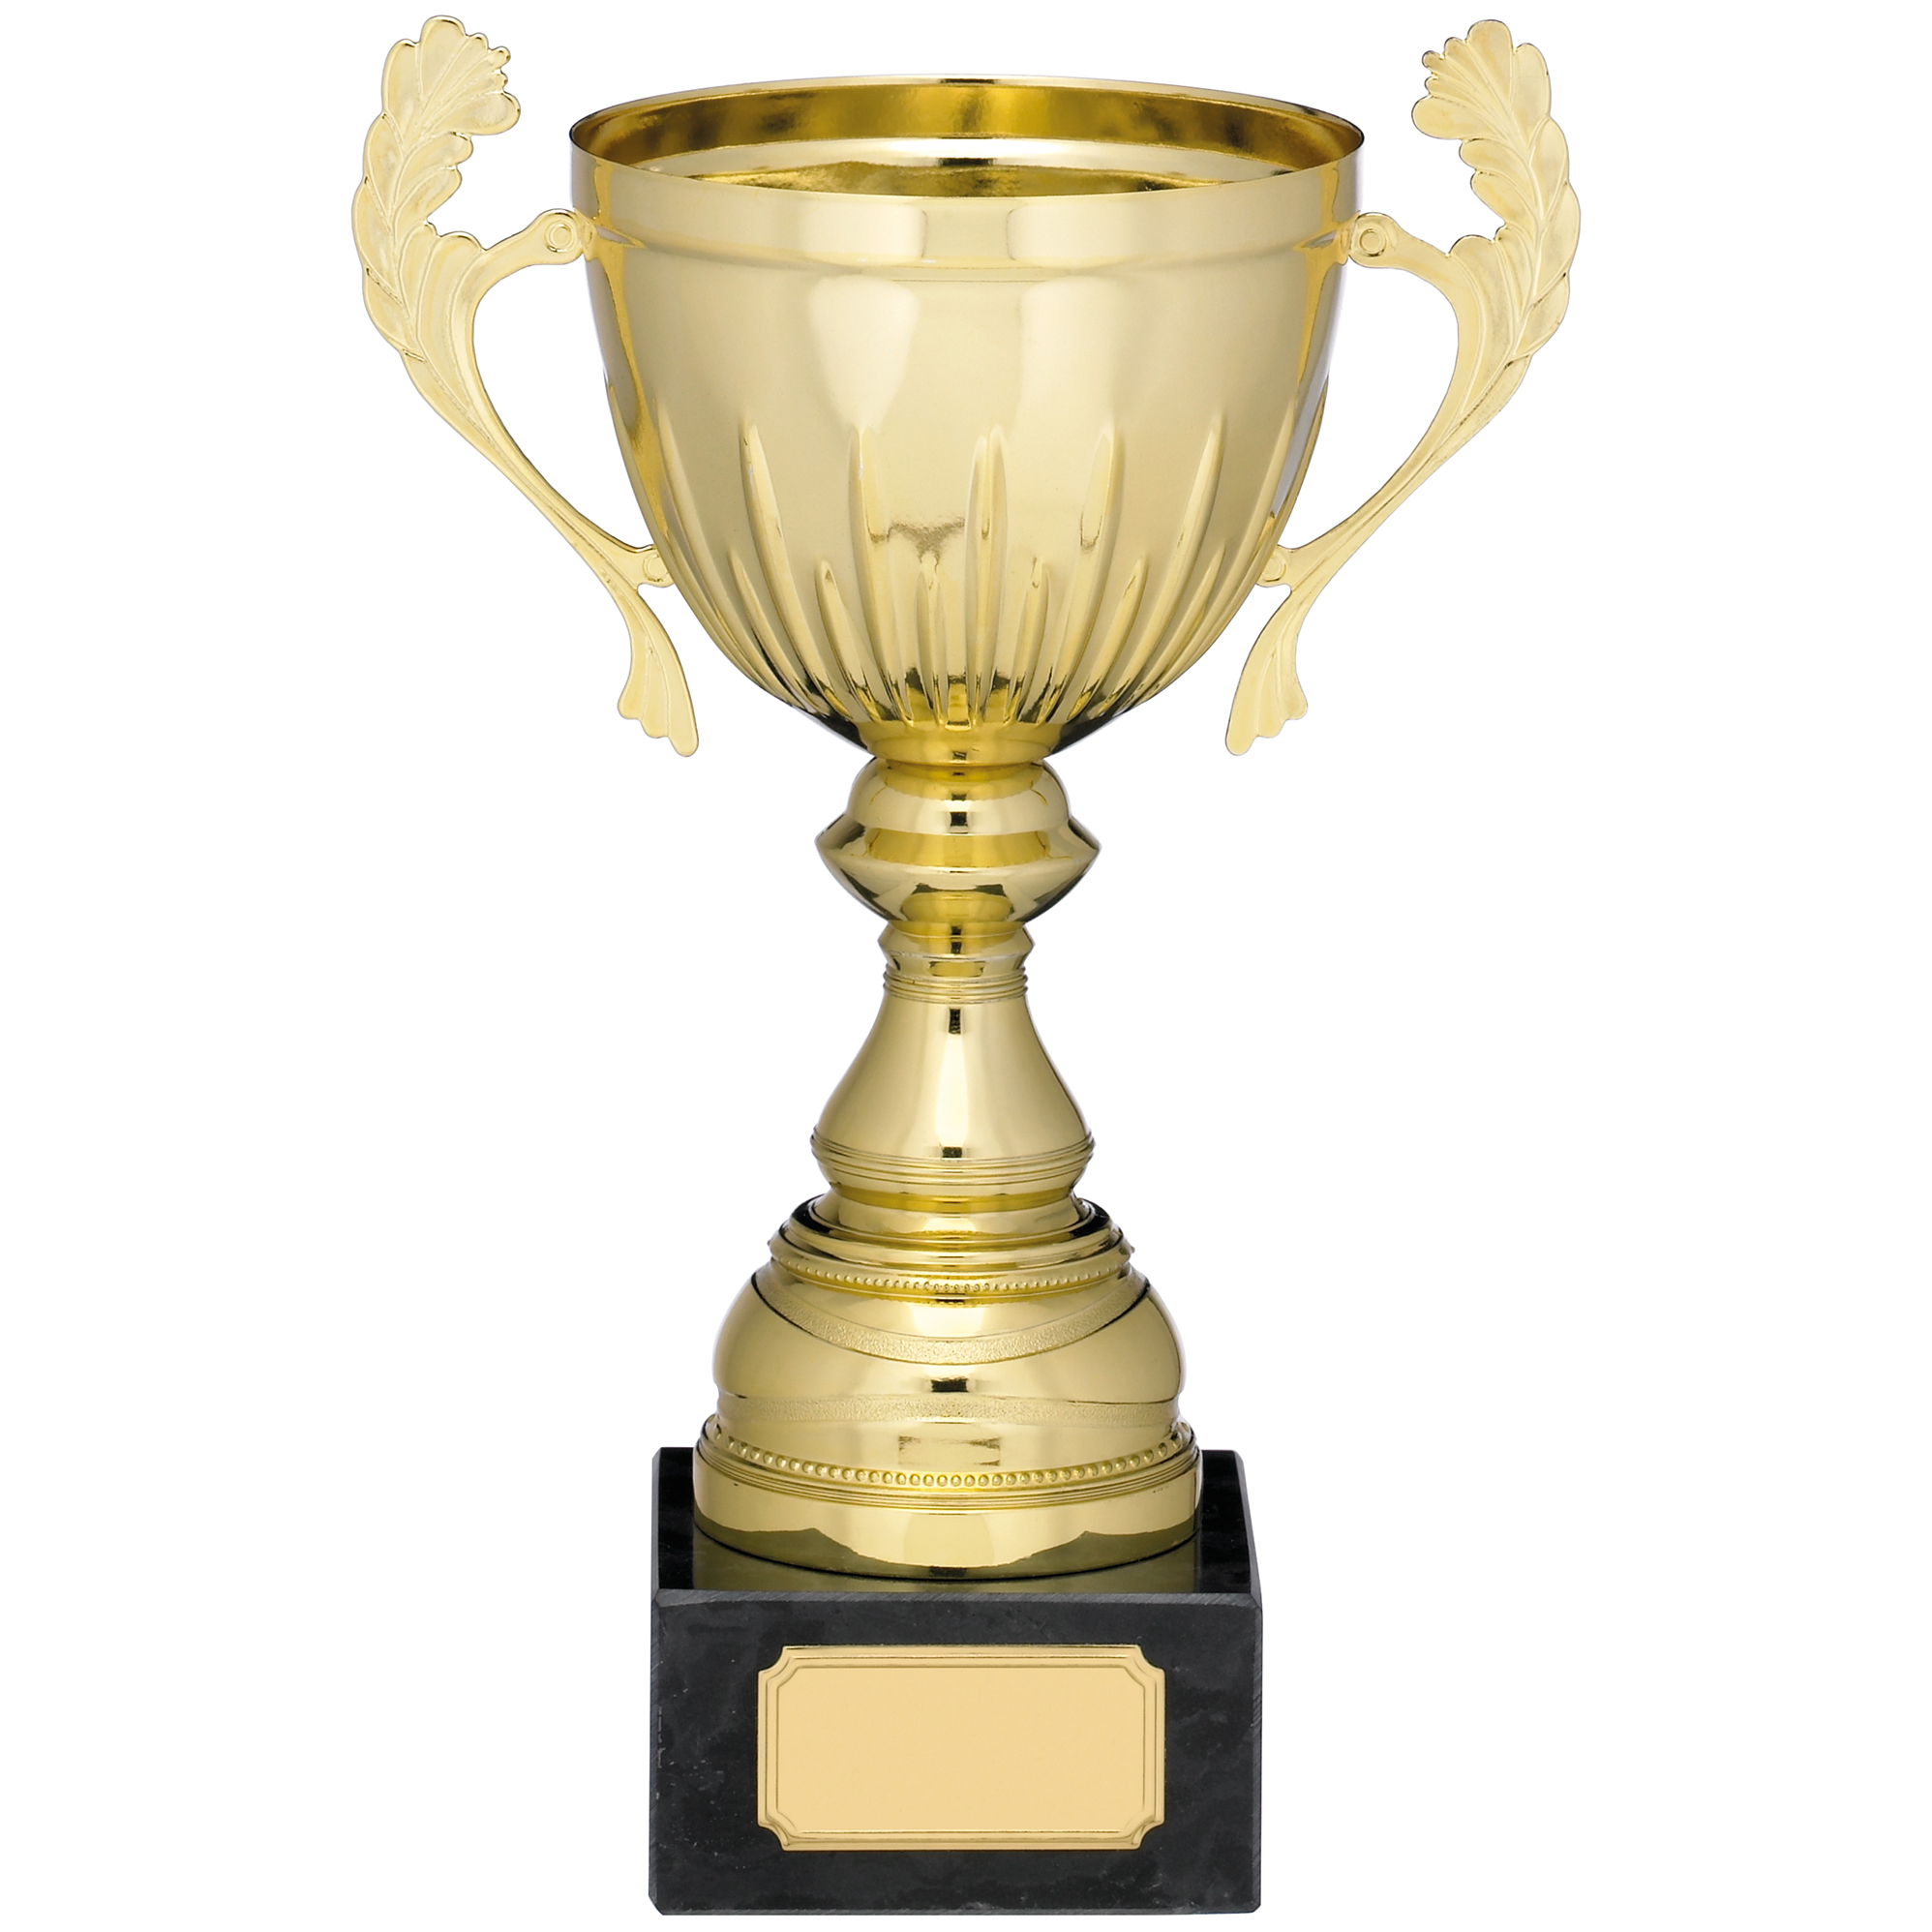 35cm GOLD CUP TROPHY WITH HANDLES